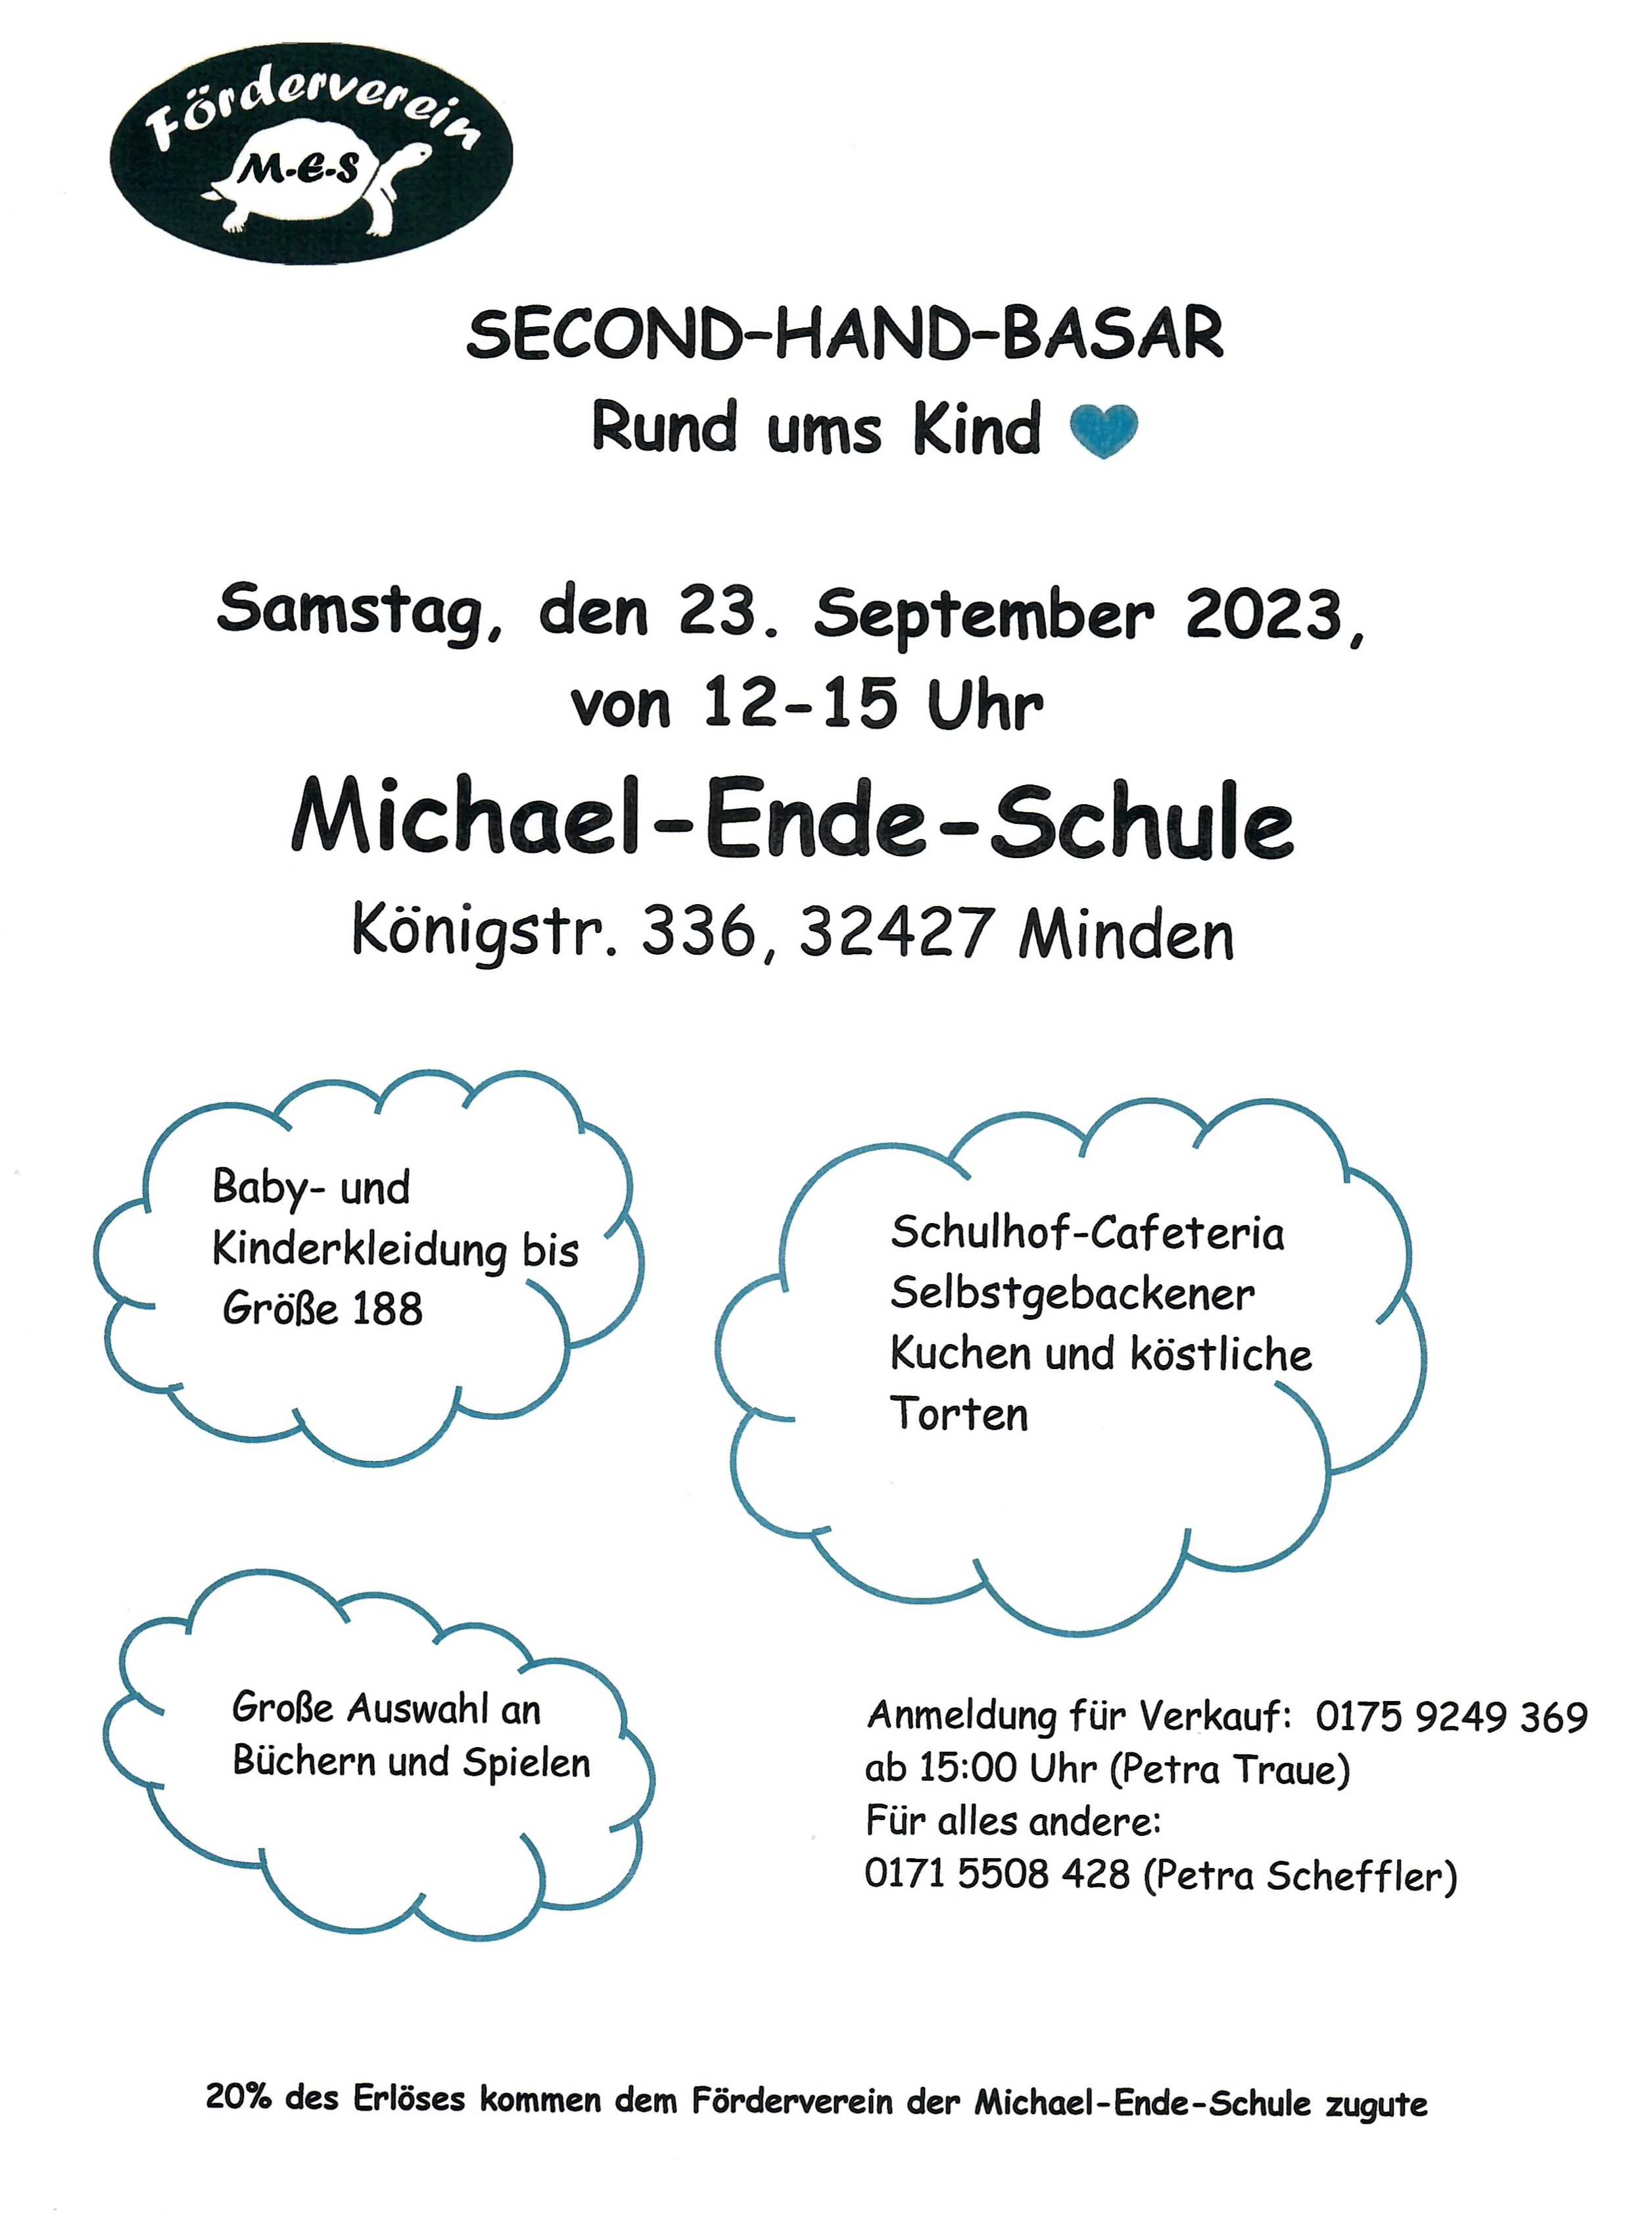 Secondhand-Basar Herbst 2023